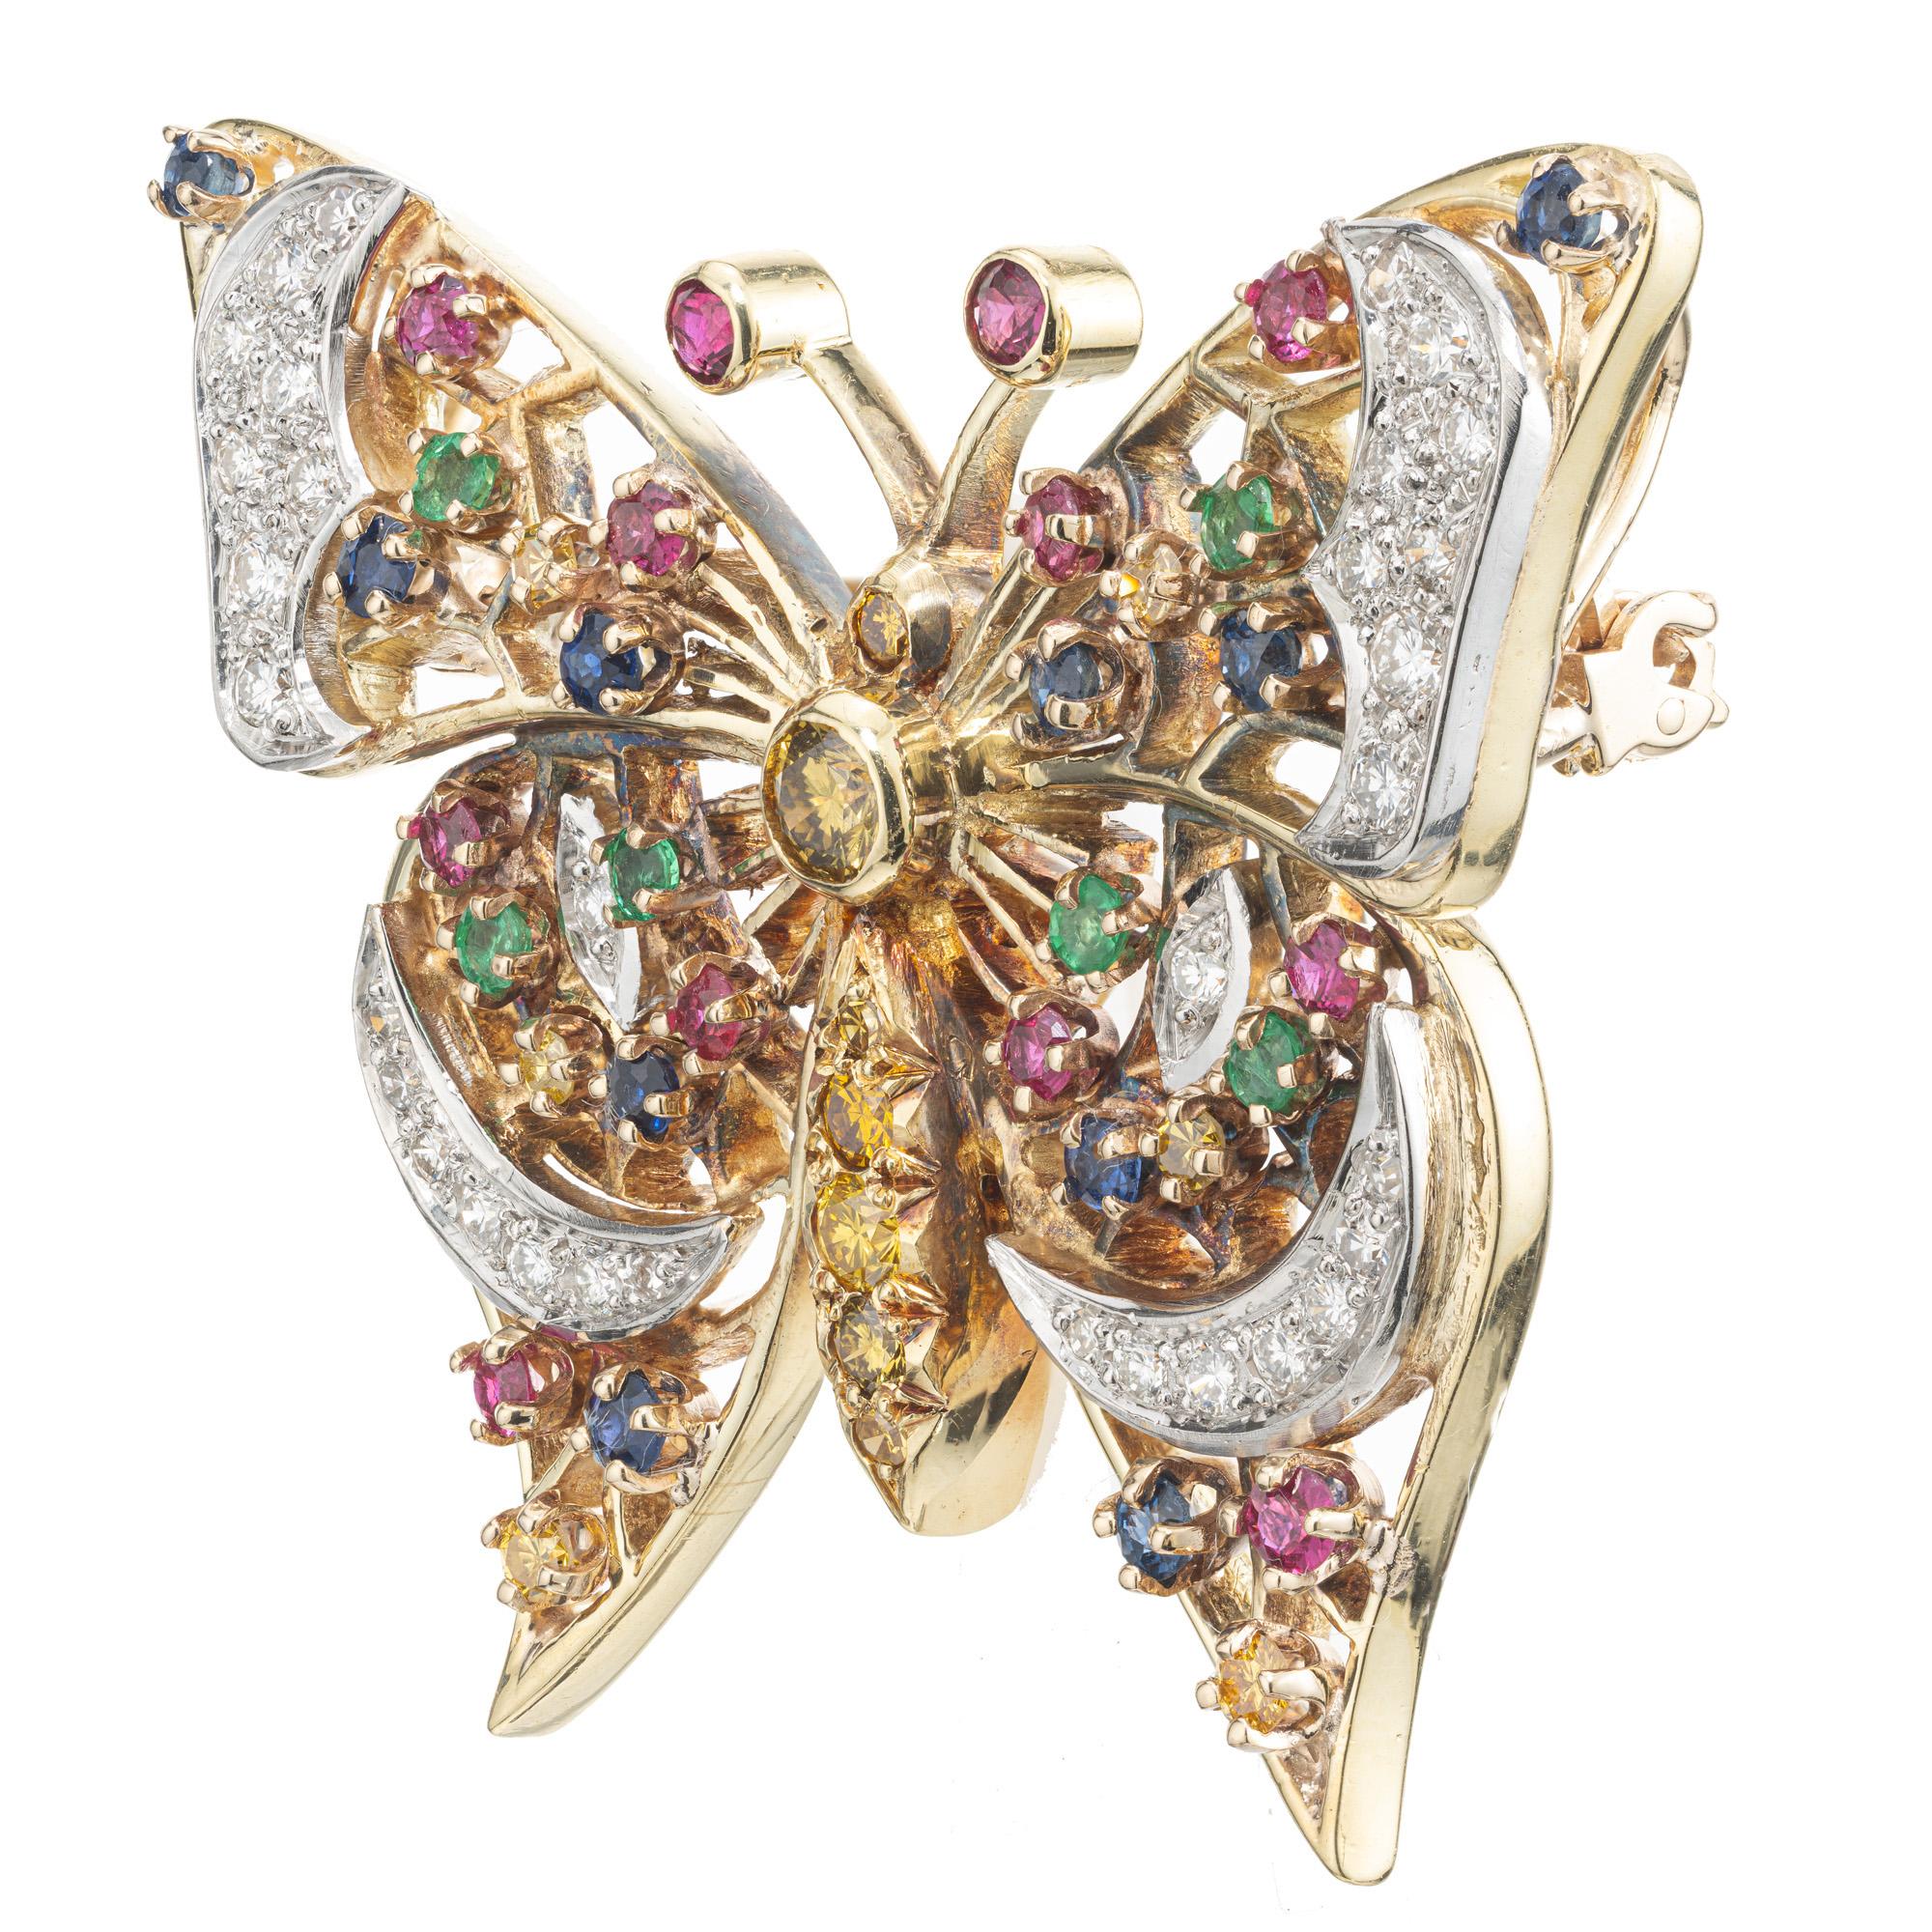 Beautiful and stunning custom made butterfly brooch and pendant. Adorned with 72 round white diamonds, 18 round cut yellow diamonds, 10 round rubies, 8 round sapphires and 6 round emeralds. The butterfly is constructed in 18k yellow gold with